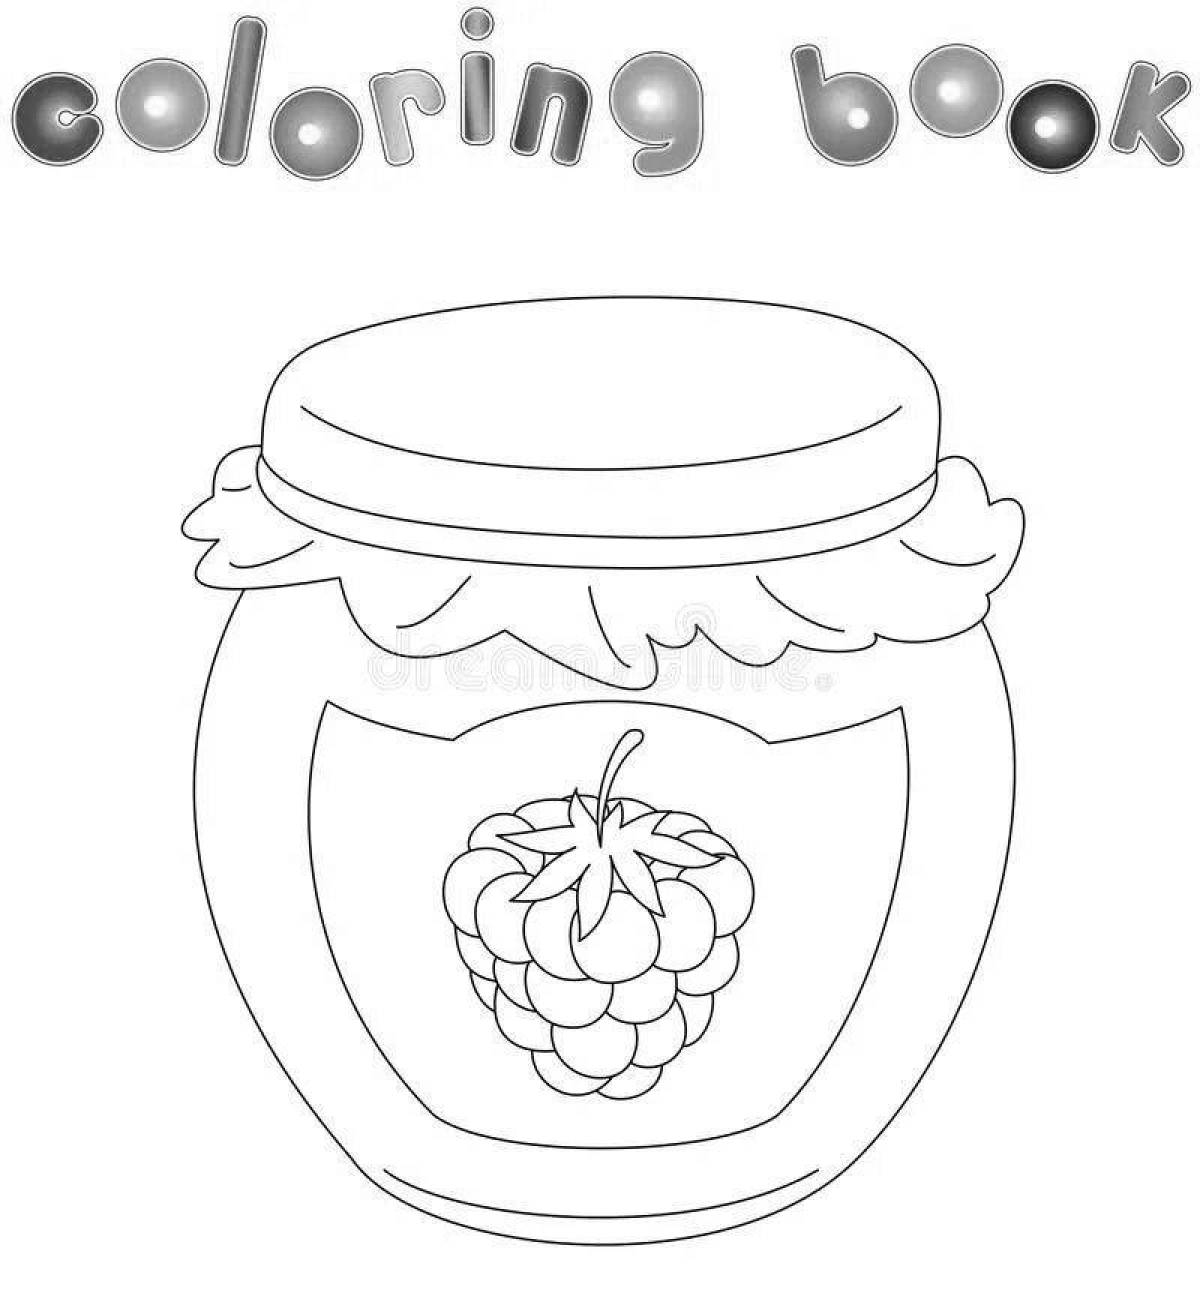 Exciting coloring jam